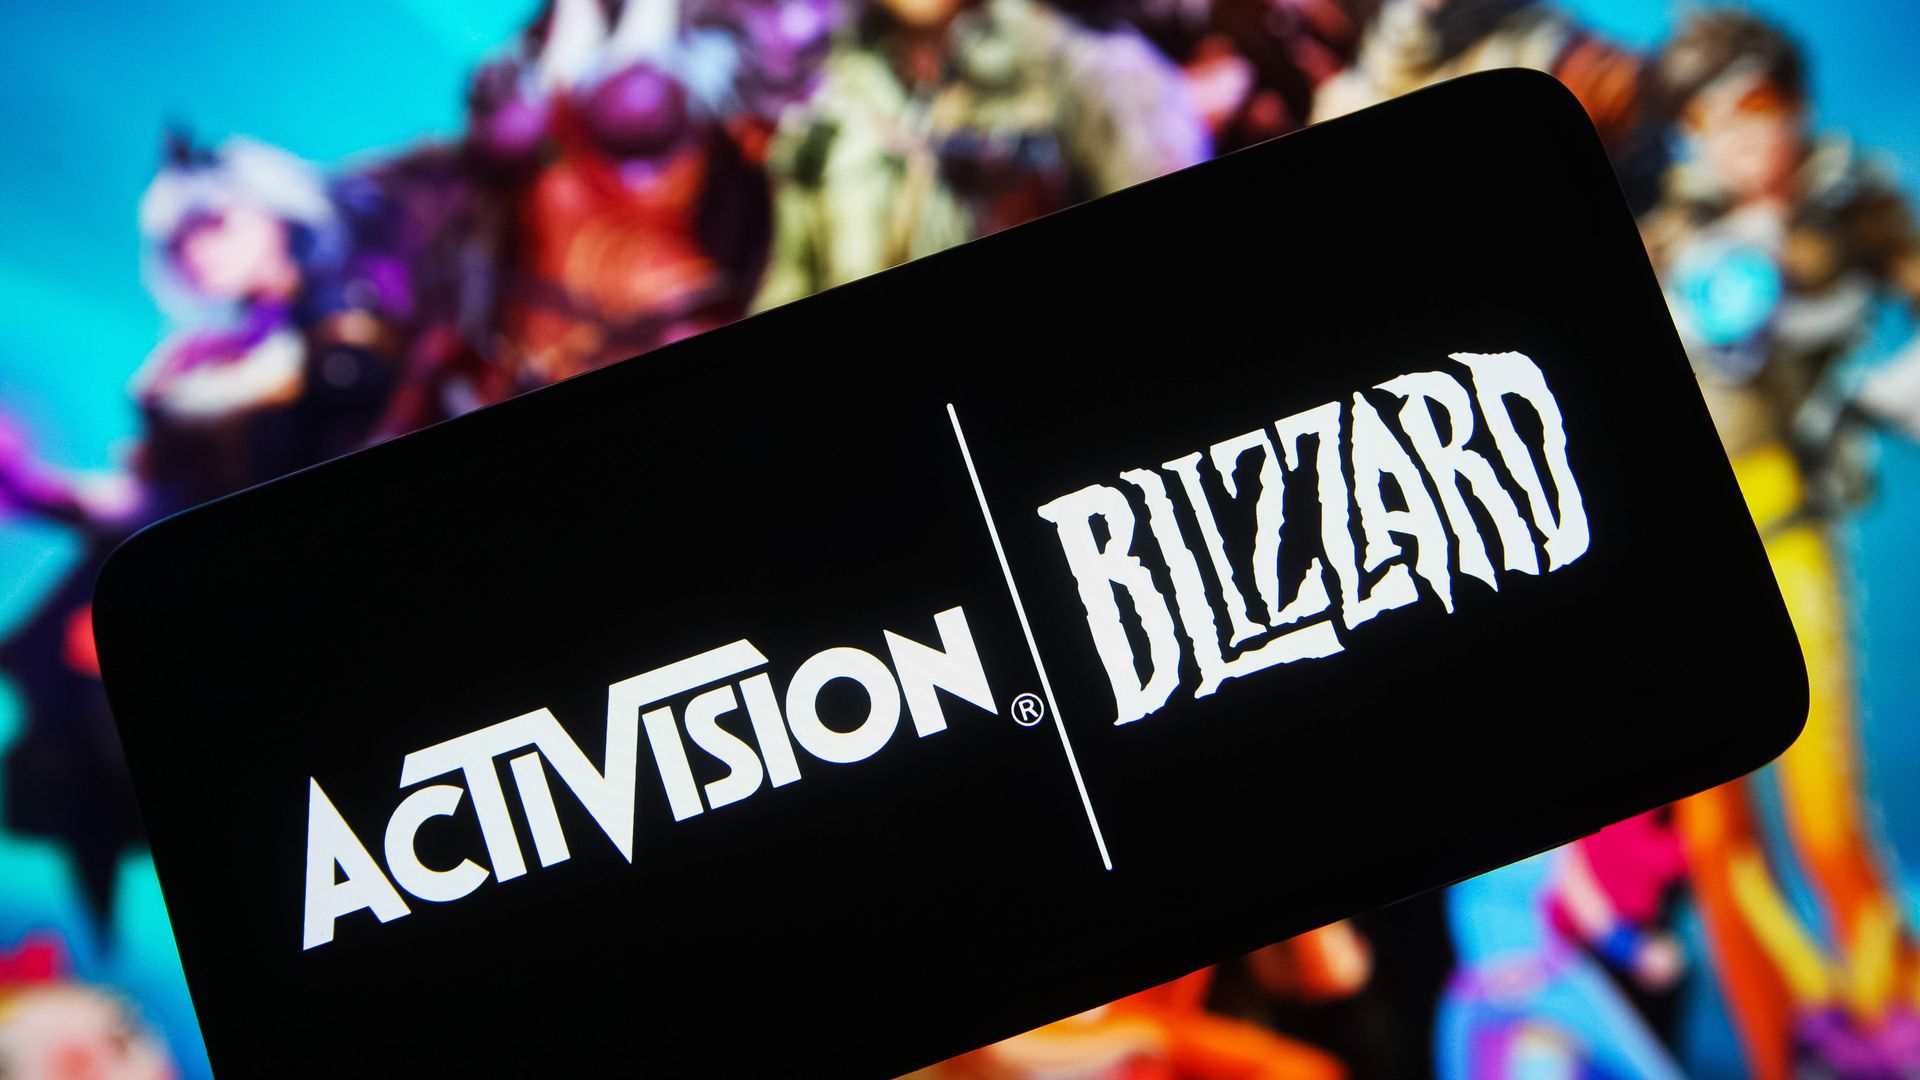 Photo illustration of Activision Blizzard logos on a phone, with colorful game characters behind them